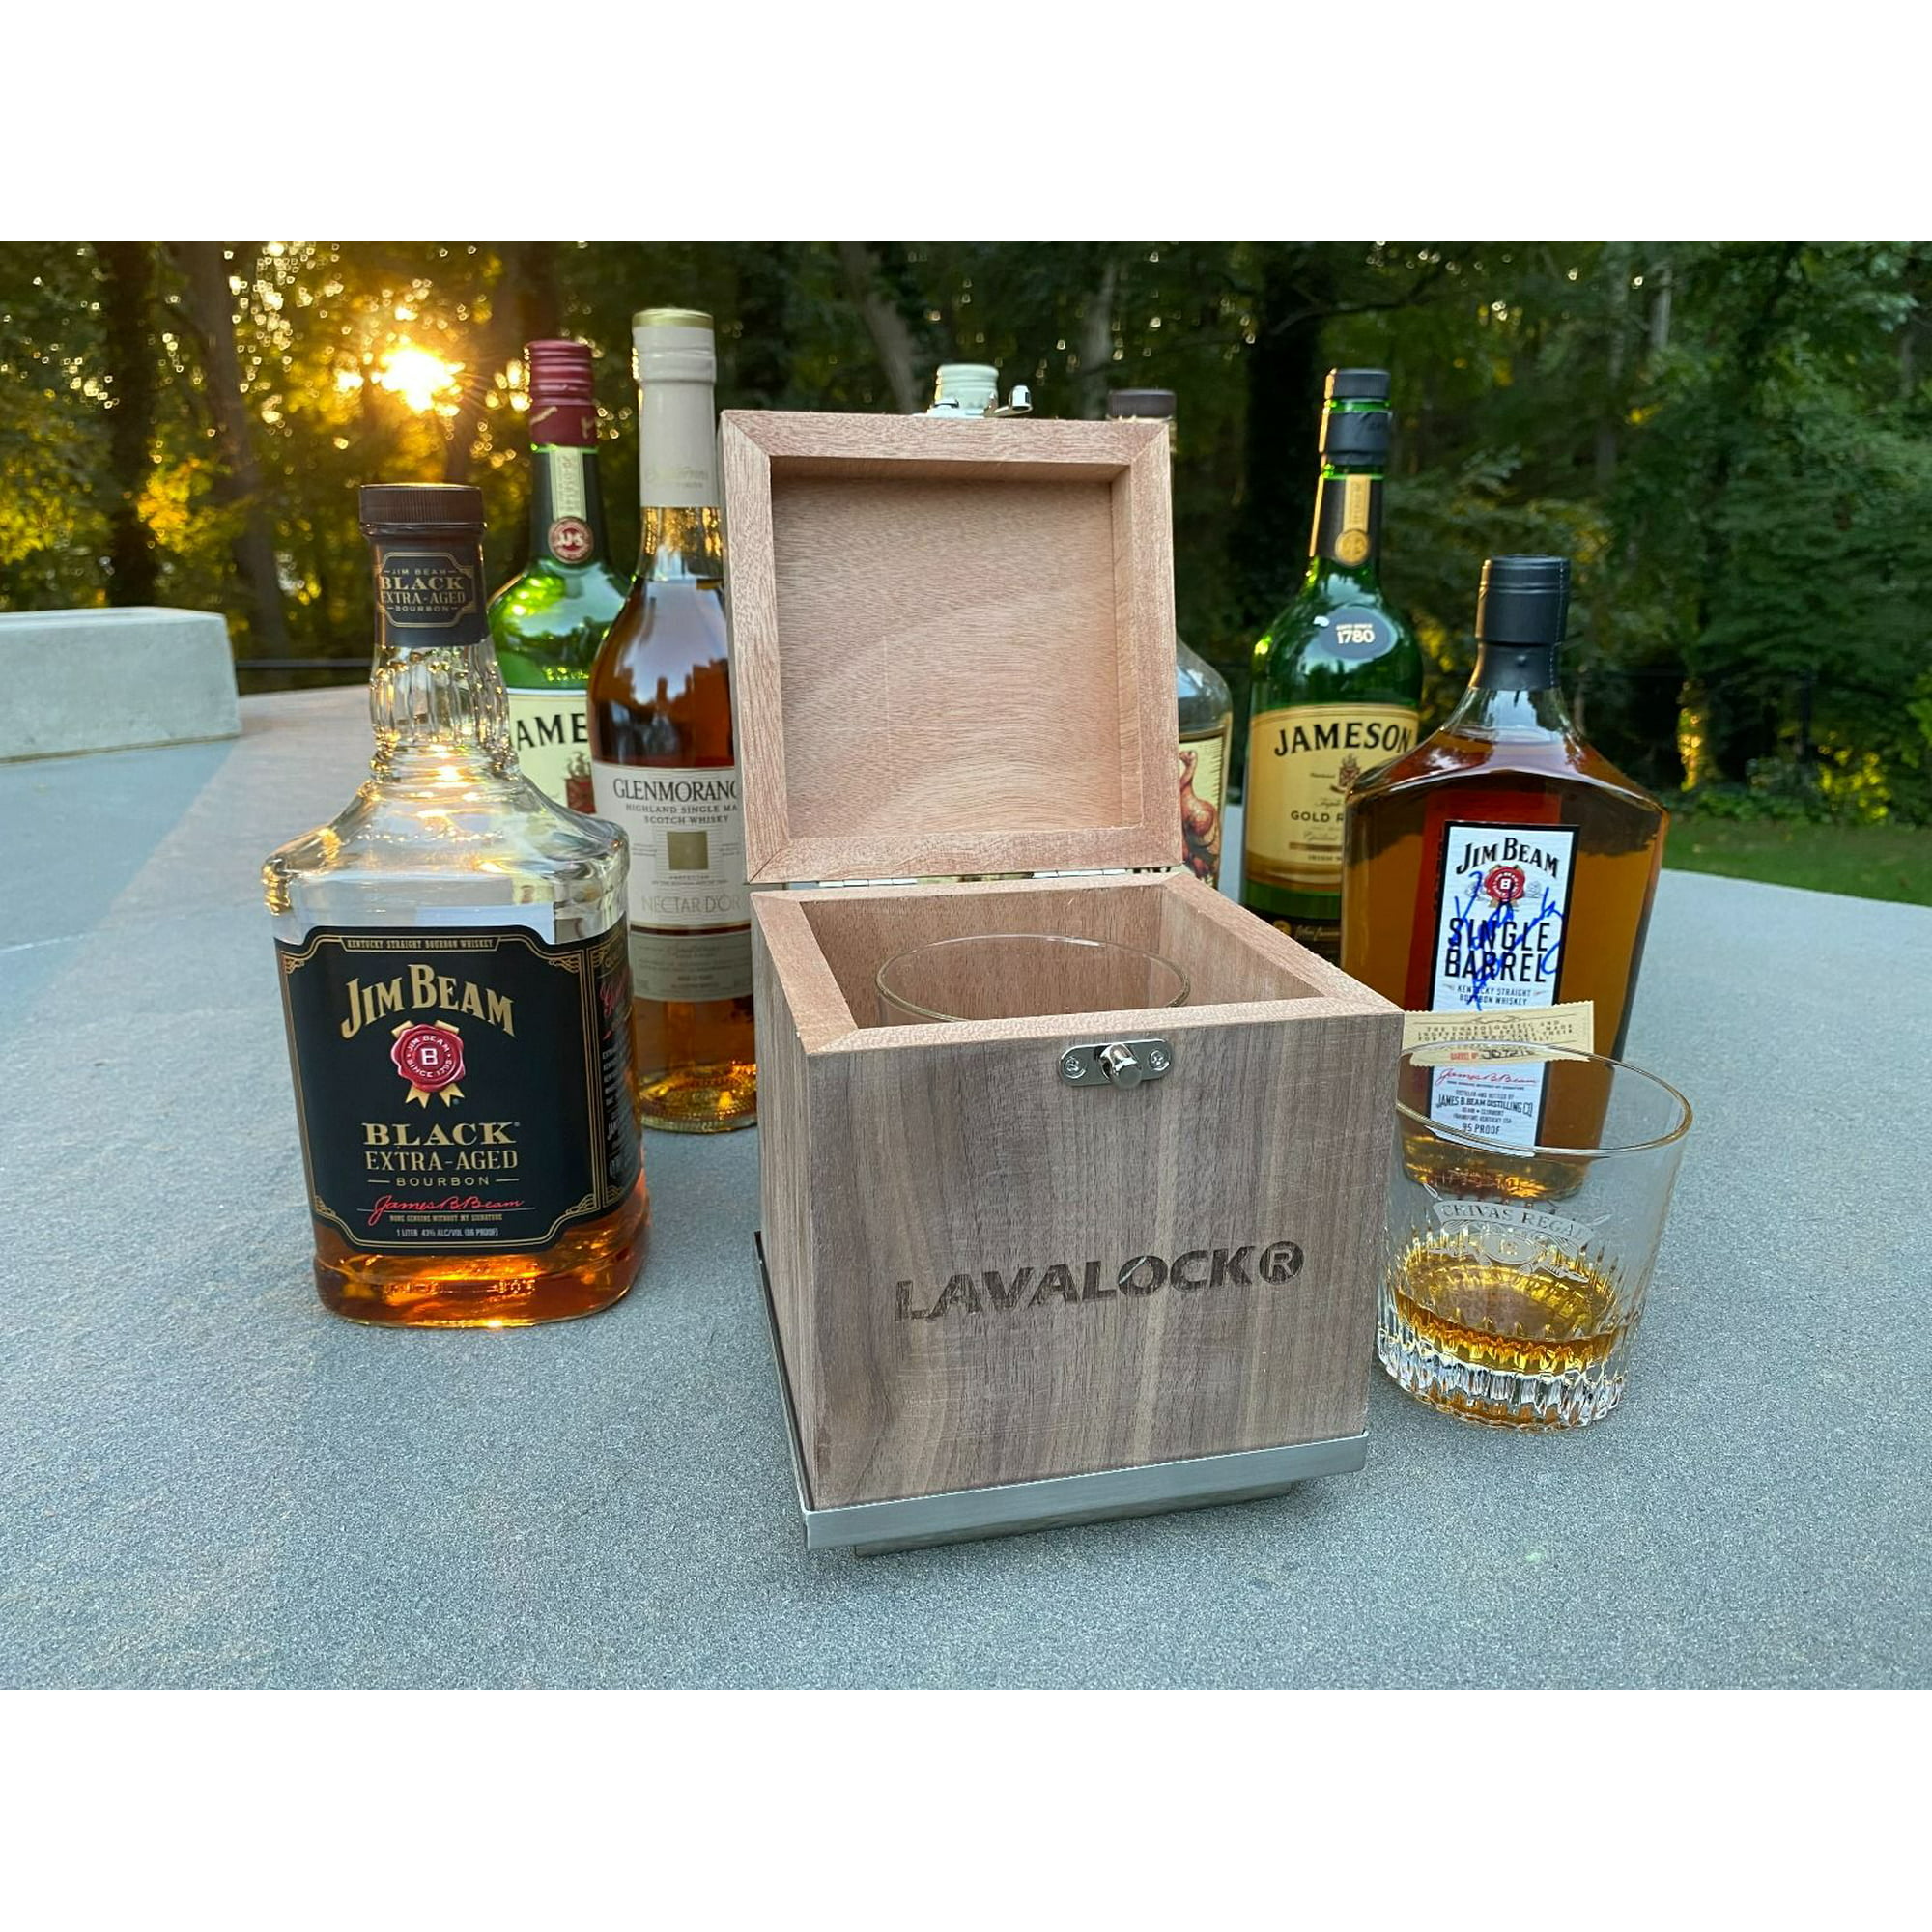 Cocktail Smoker Kit, Wood Whiskey Smoking Box with Stainless Tray, Grate and Wood Chip Pan, Size: 5.5 x 5.5 x 6.75